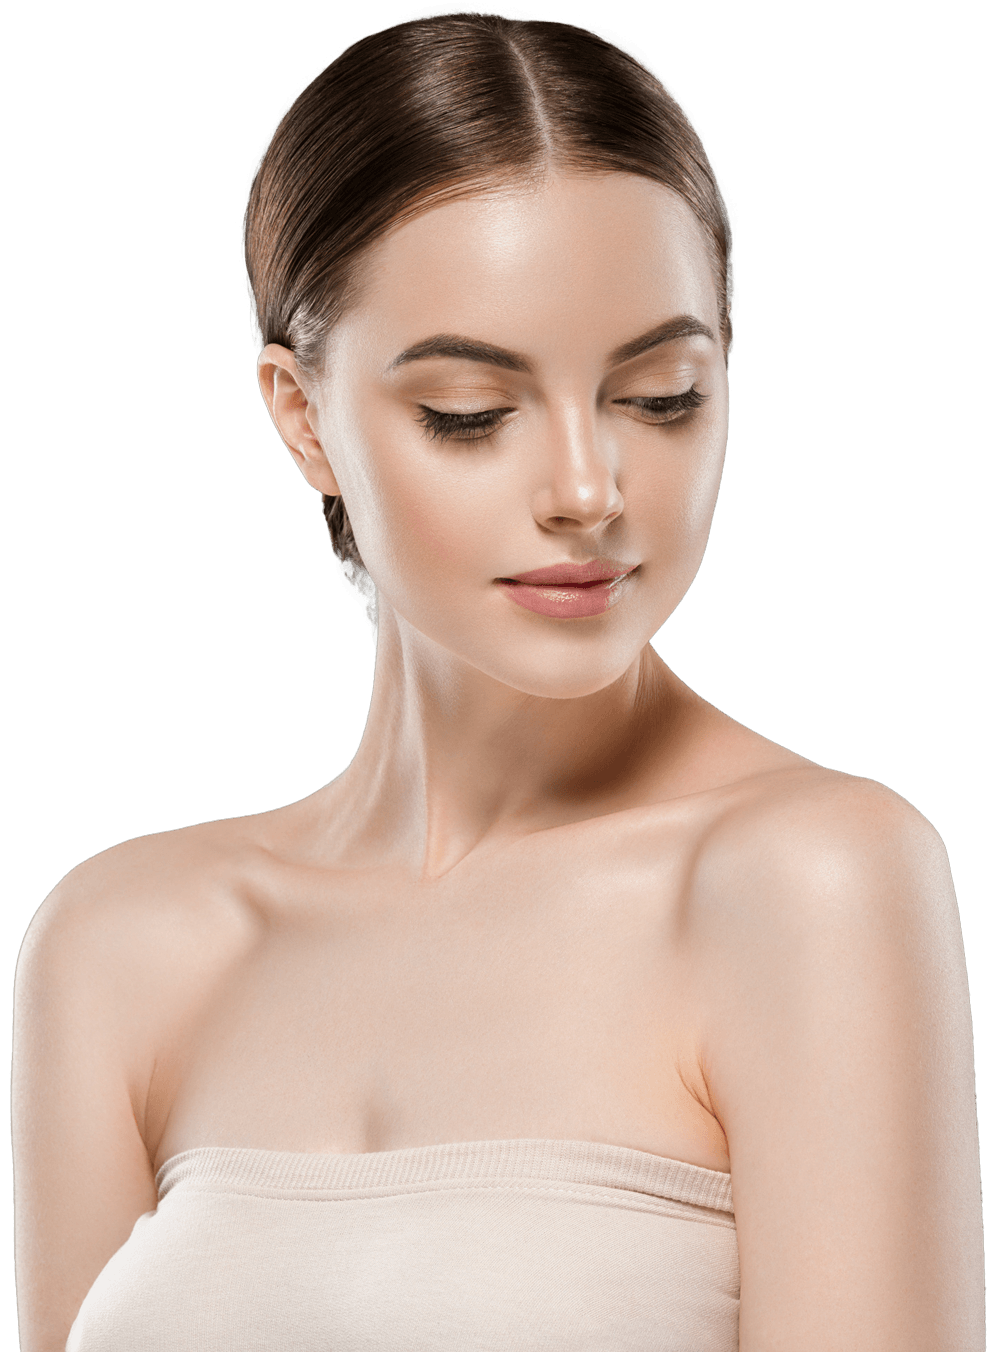 Contact Immortal Cosmedical in Bowral